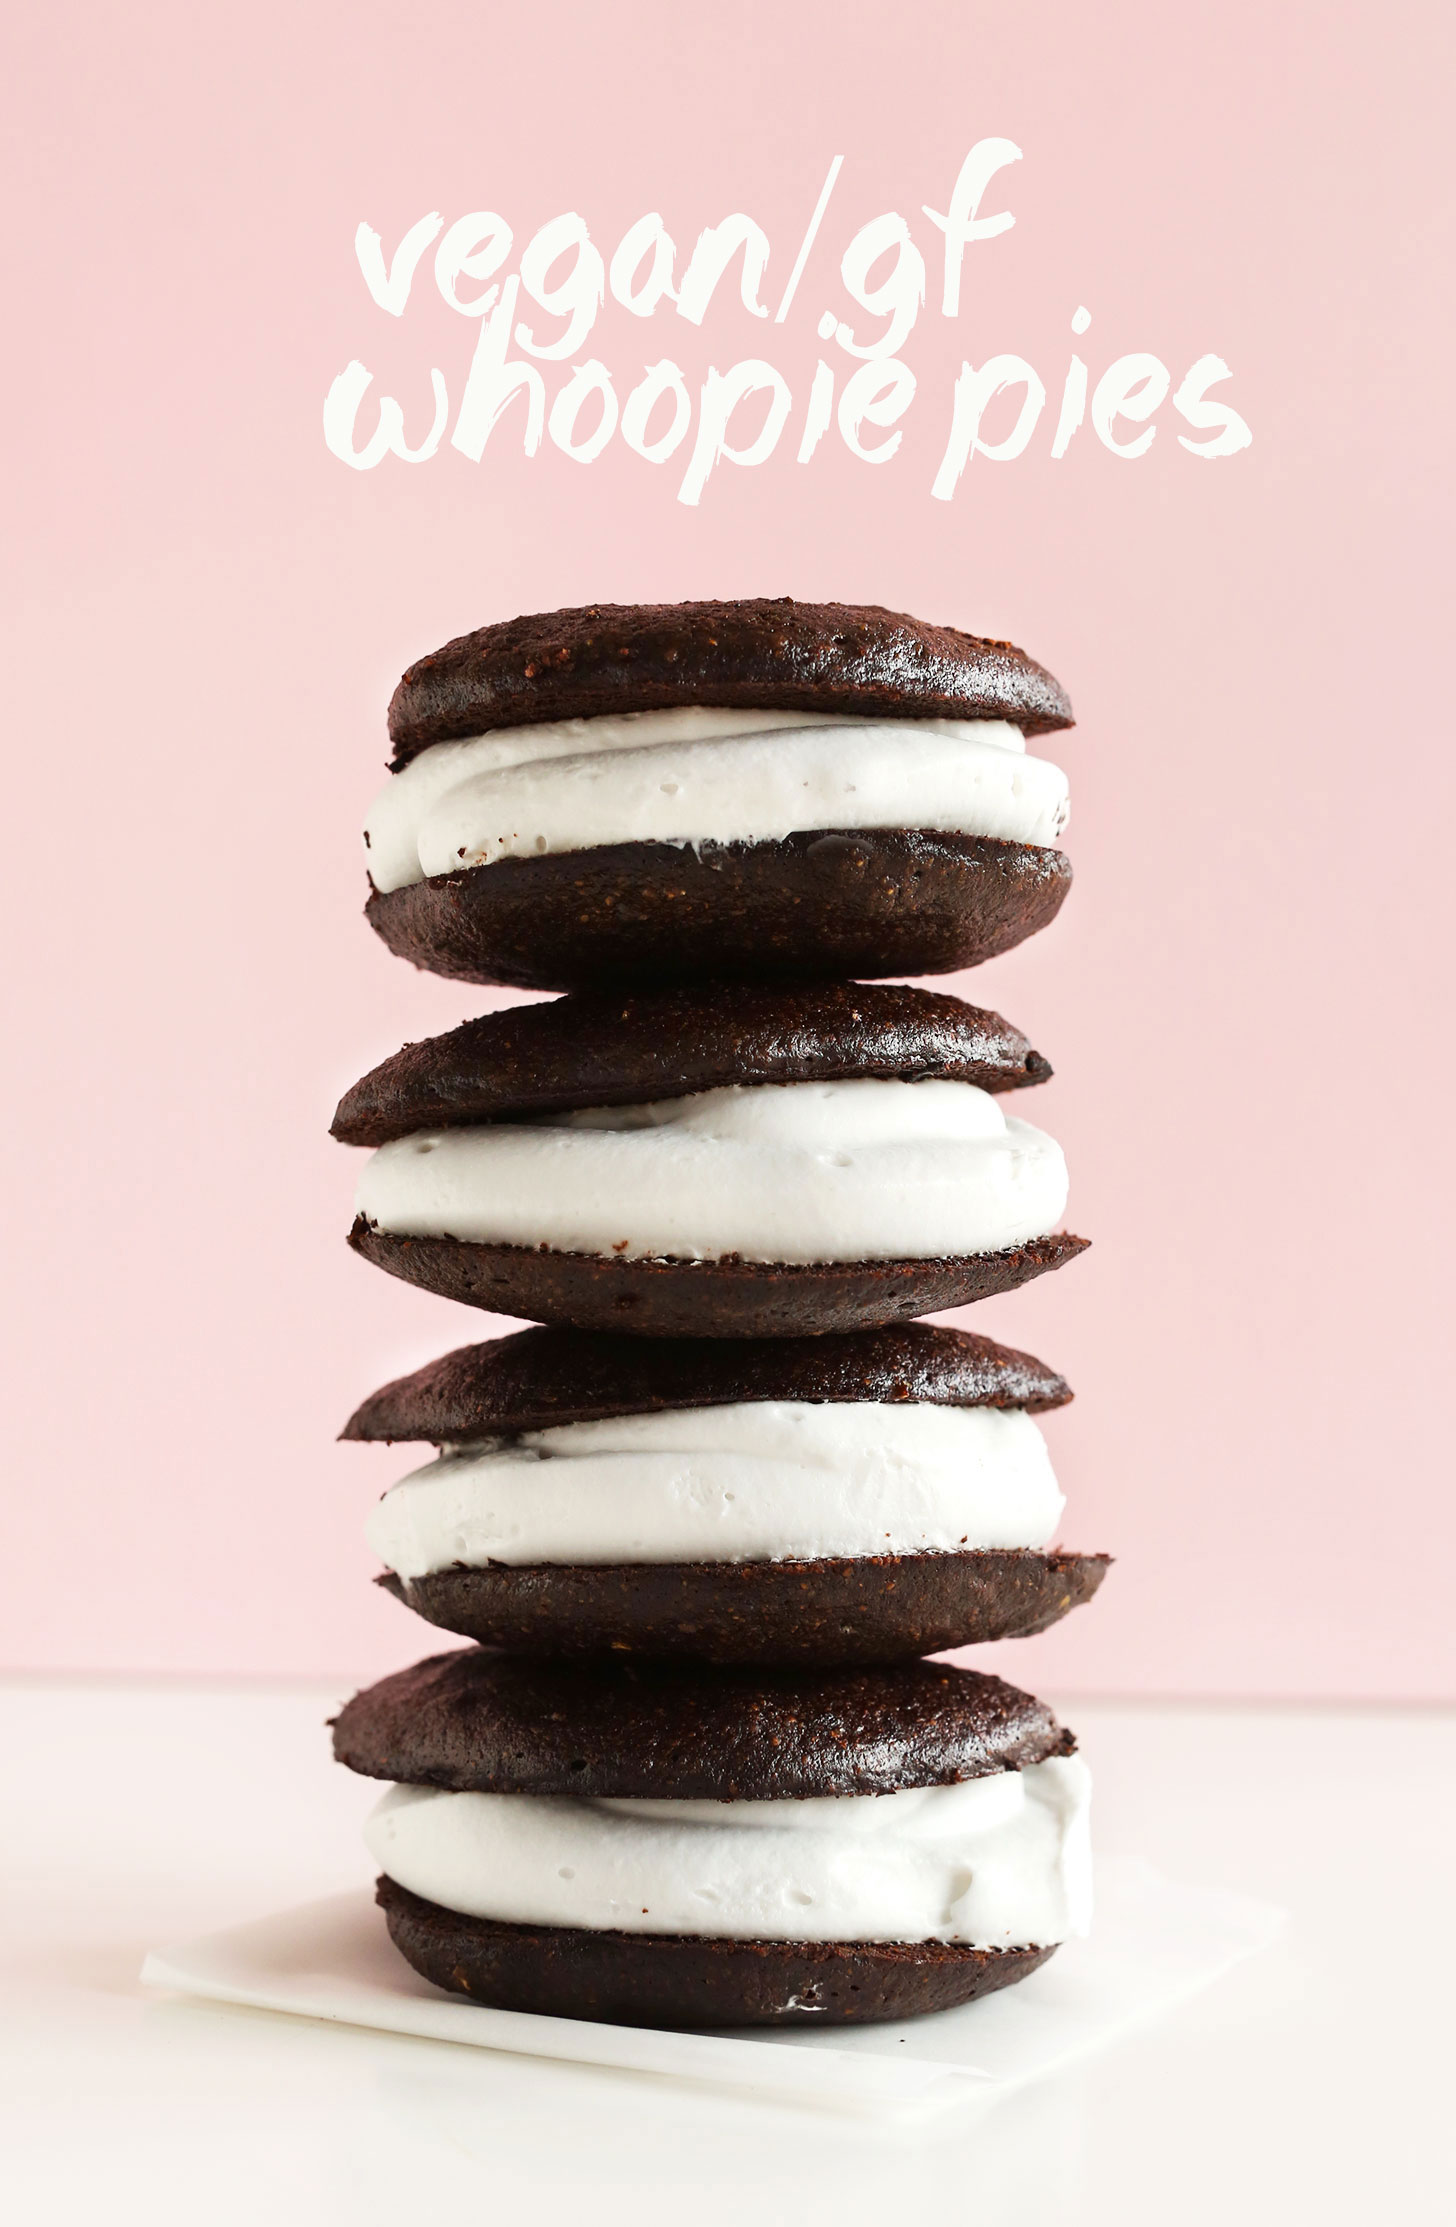 Stack of our naturally-sweetened gluten-free vegan whoopie pies